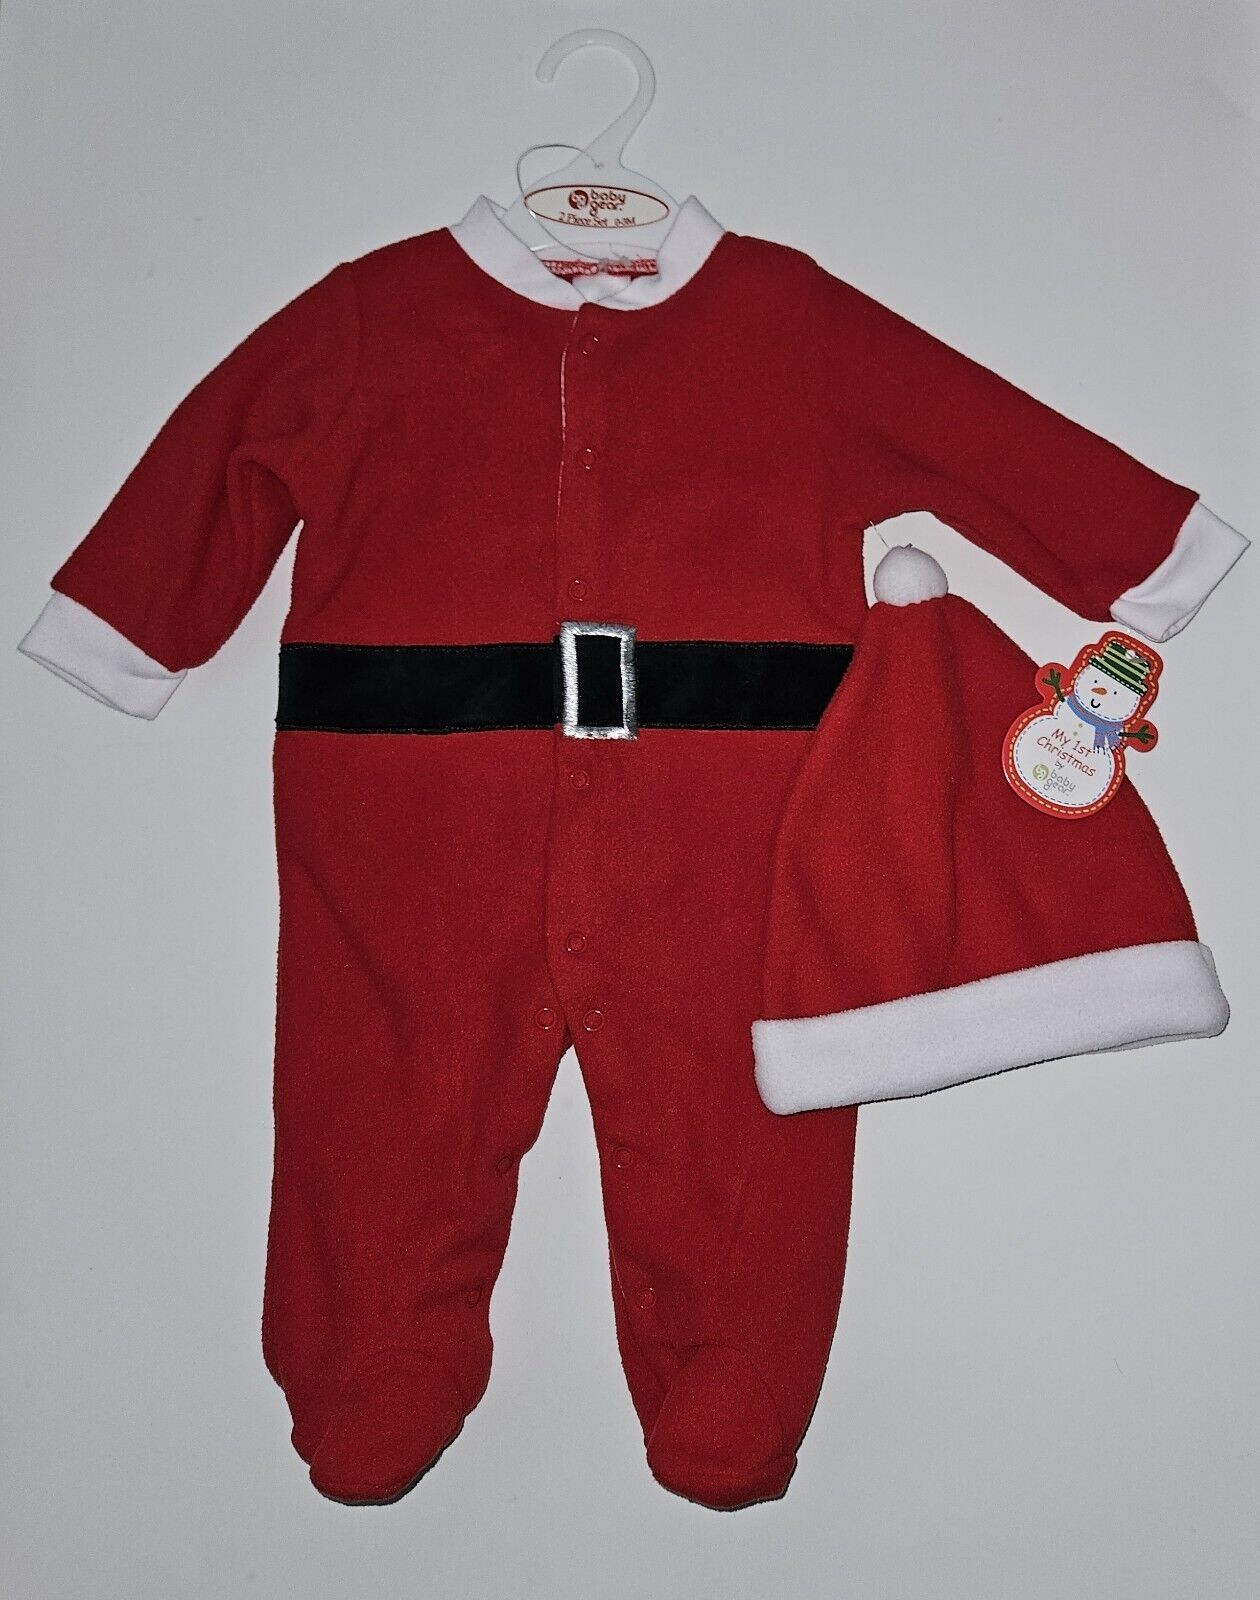 Primary image for NWT Baby Gear Red Santa Suit Footie Outfit Sleeper + Hat Christmas 0-3 Months